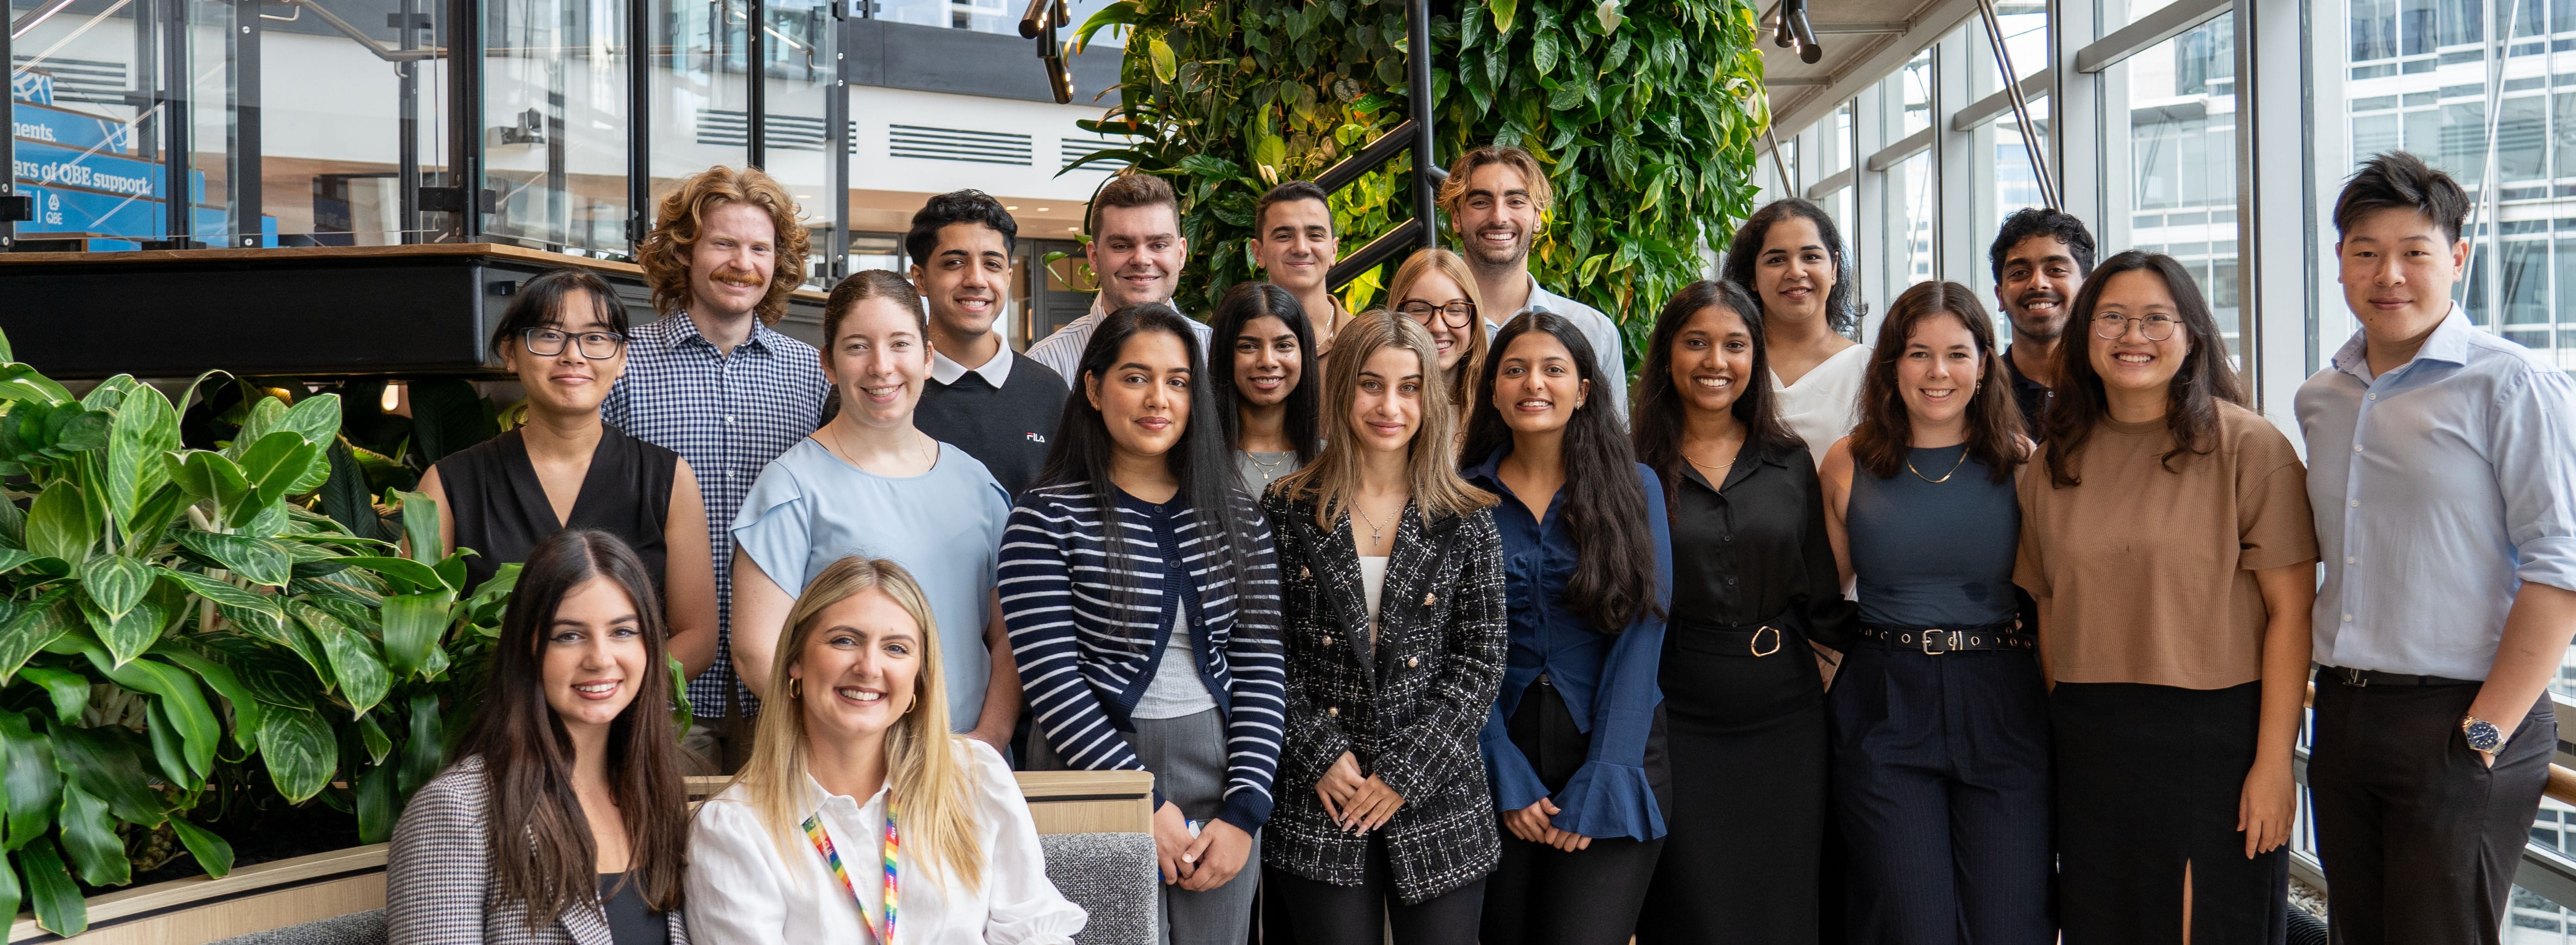 QBE graduates pose for group photo in QBE Sydney office